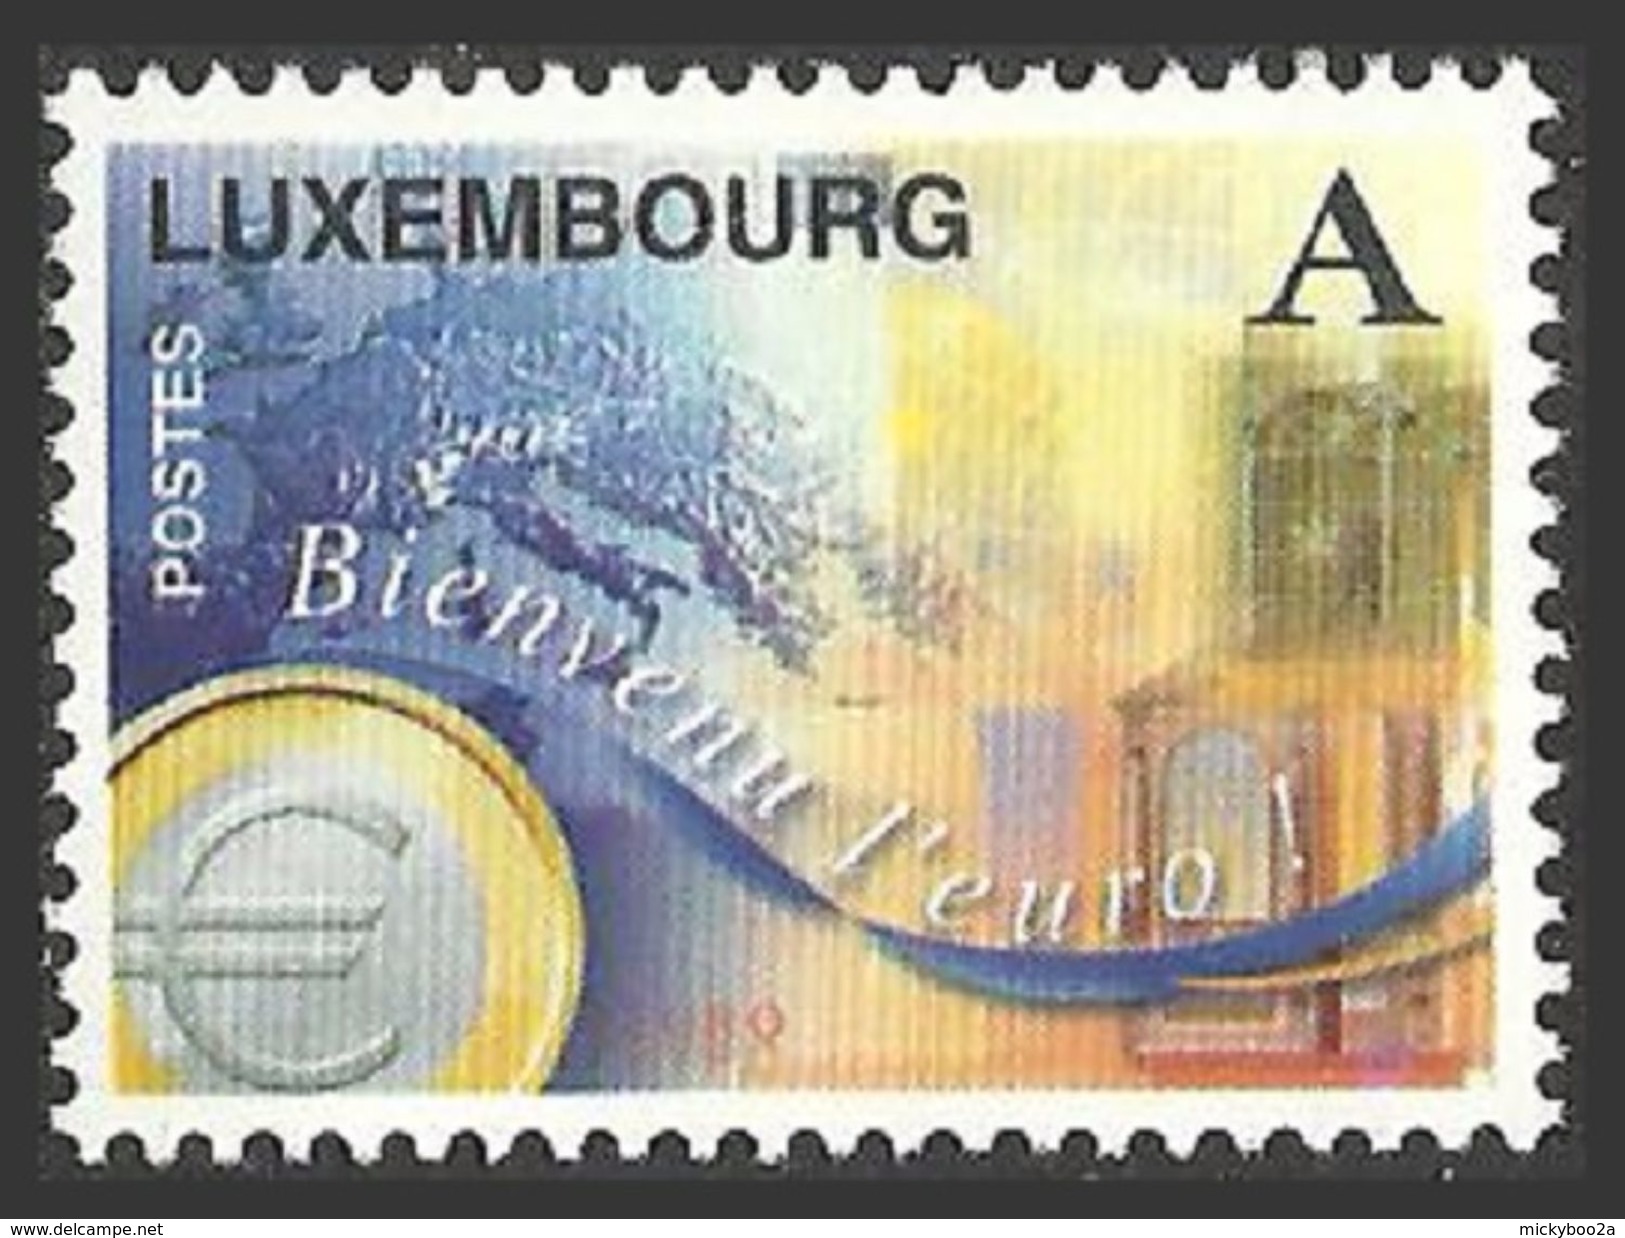 LUXEMBOURG 1999 INTRODUCTION OF THE EURO EUROPEAN CURRENCY SET MNH - Nuevos